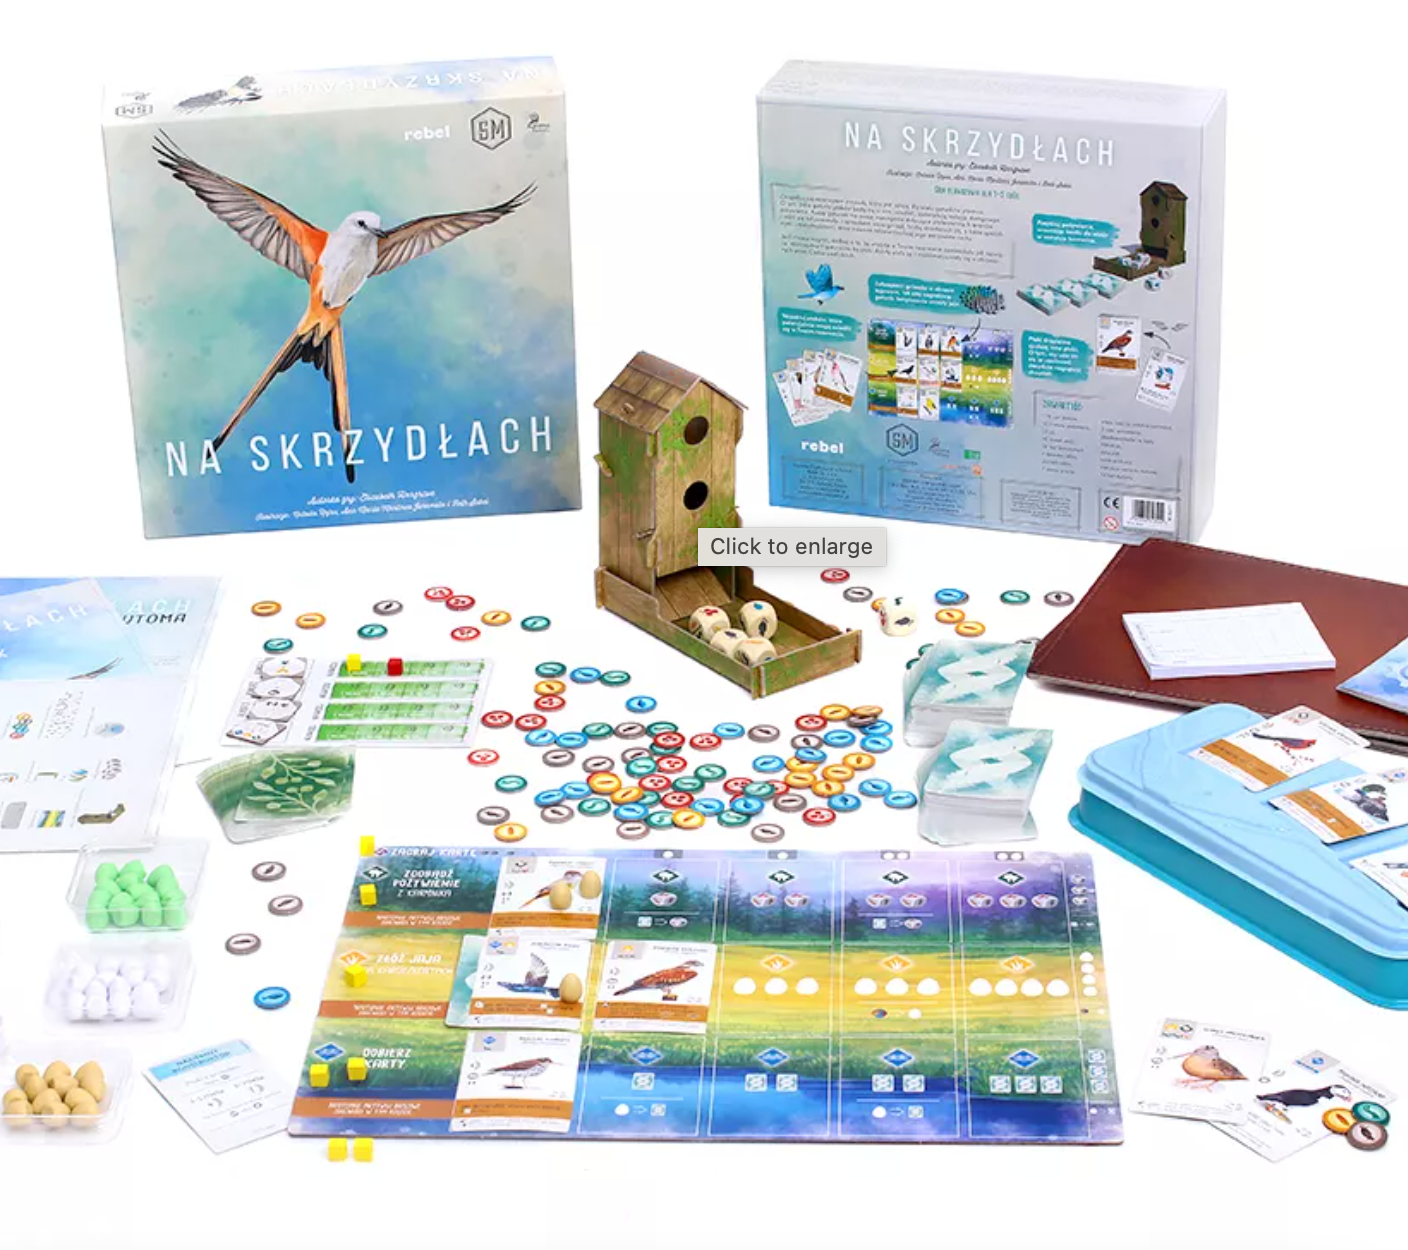 Best board games: Wingspan, designed by a D.C.-area local, is